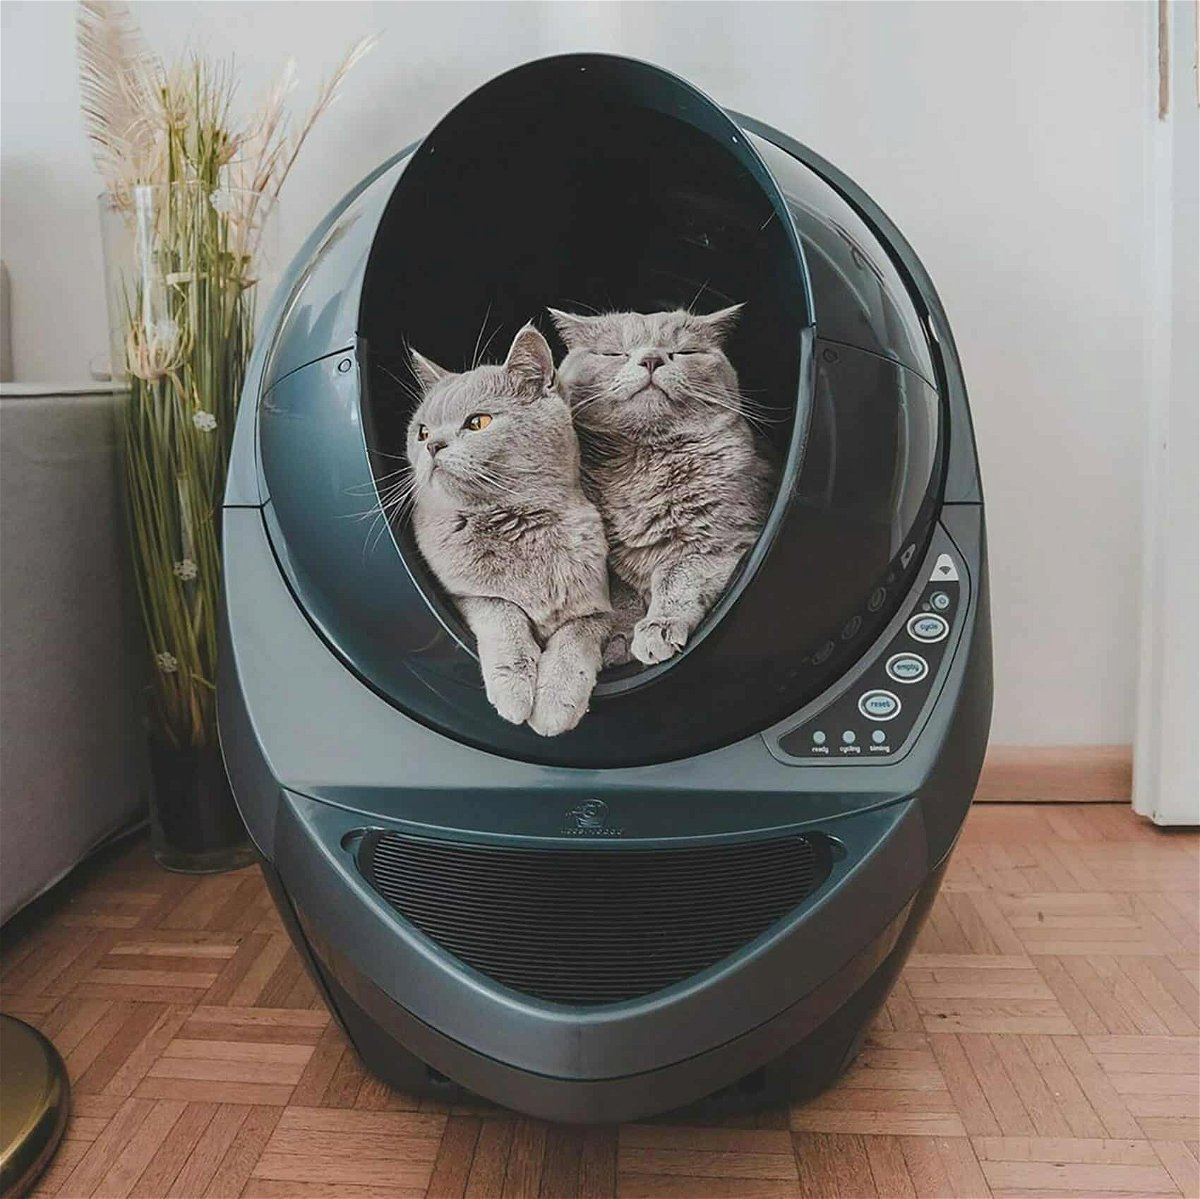 Things to Know Before Buying an Automatic Cat Litter Box